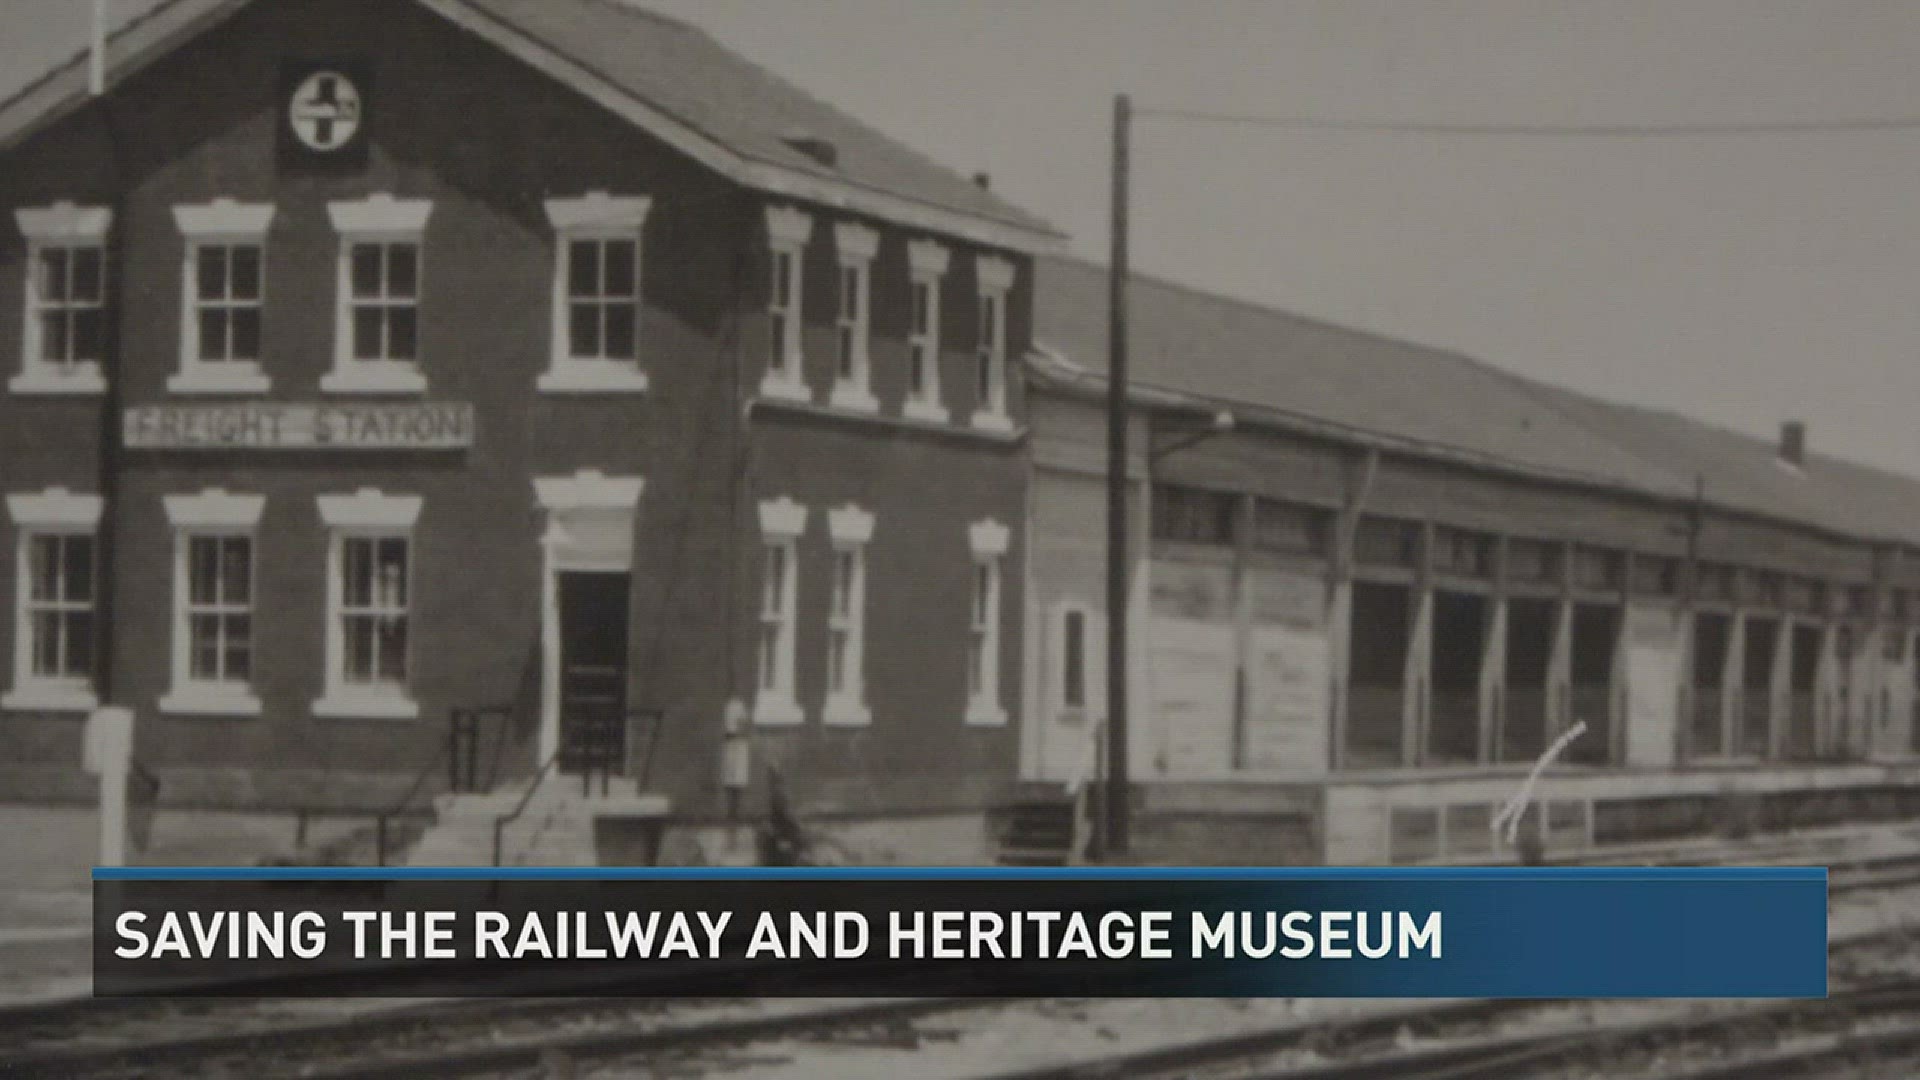 The Railway and Heritage Museum of San Angelo started 20 years ago. And while it only filled two rooms at the time, it now fills the entire 107-year-old building.